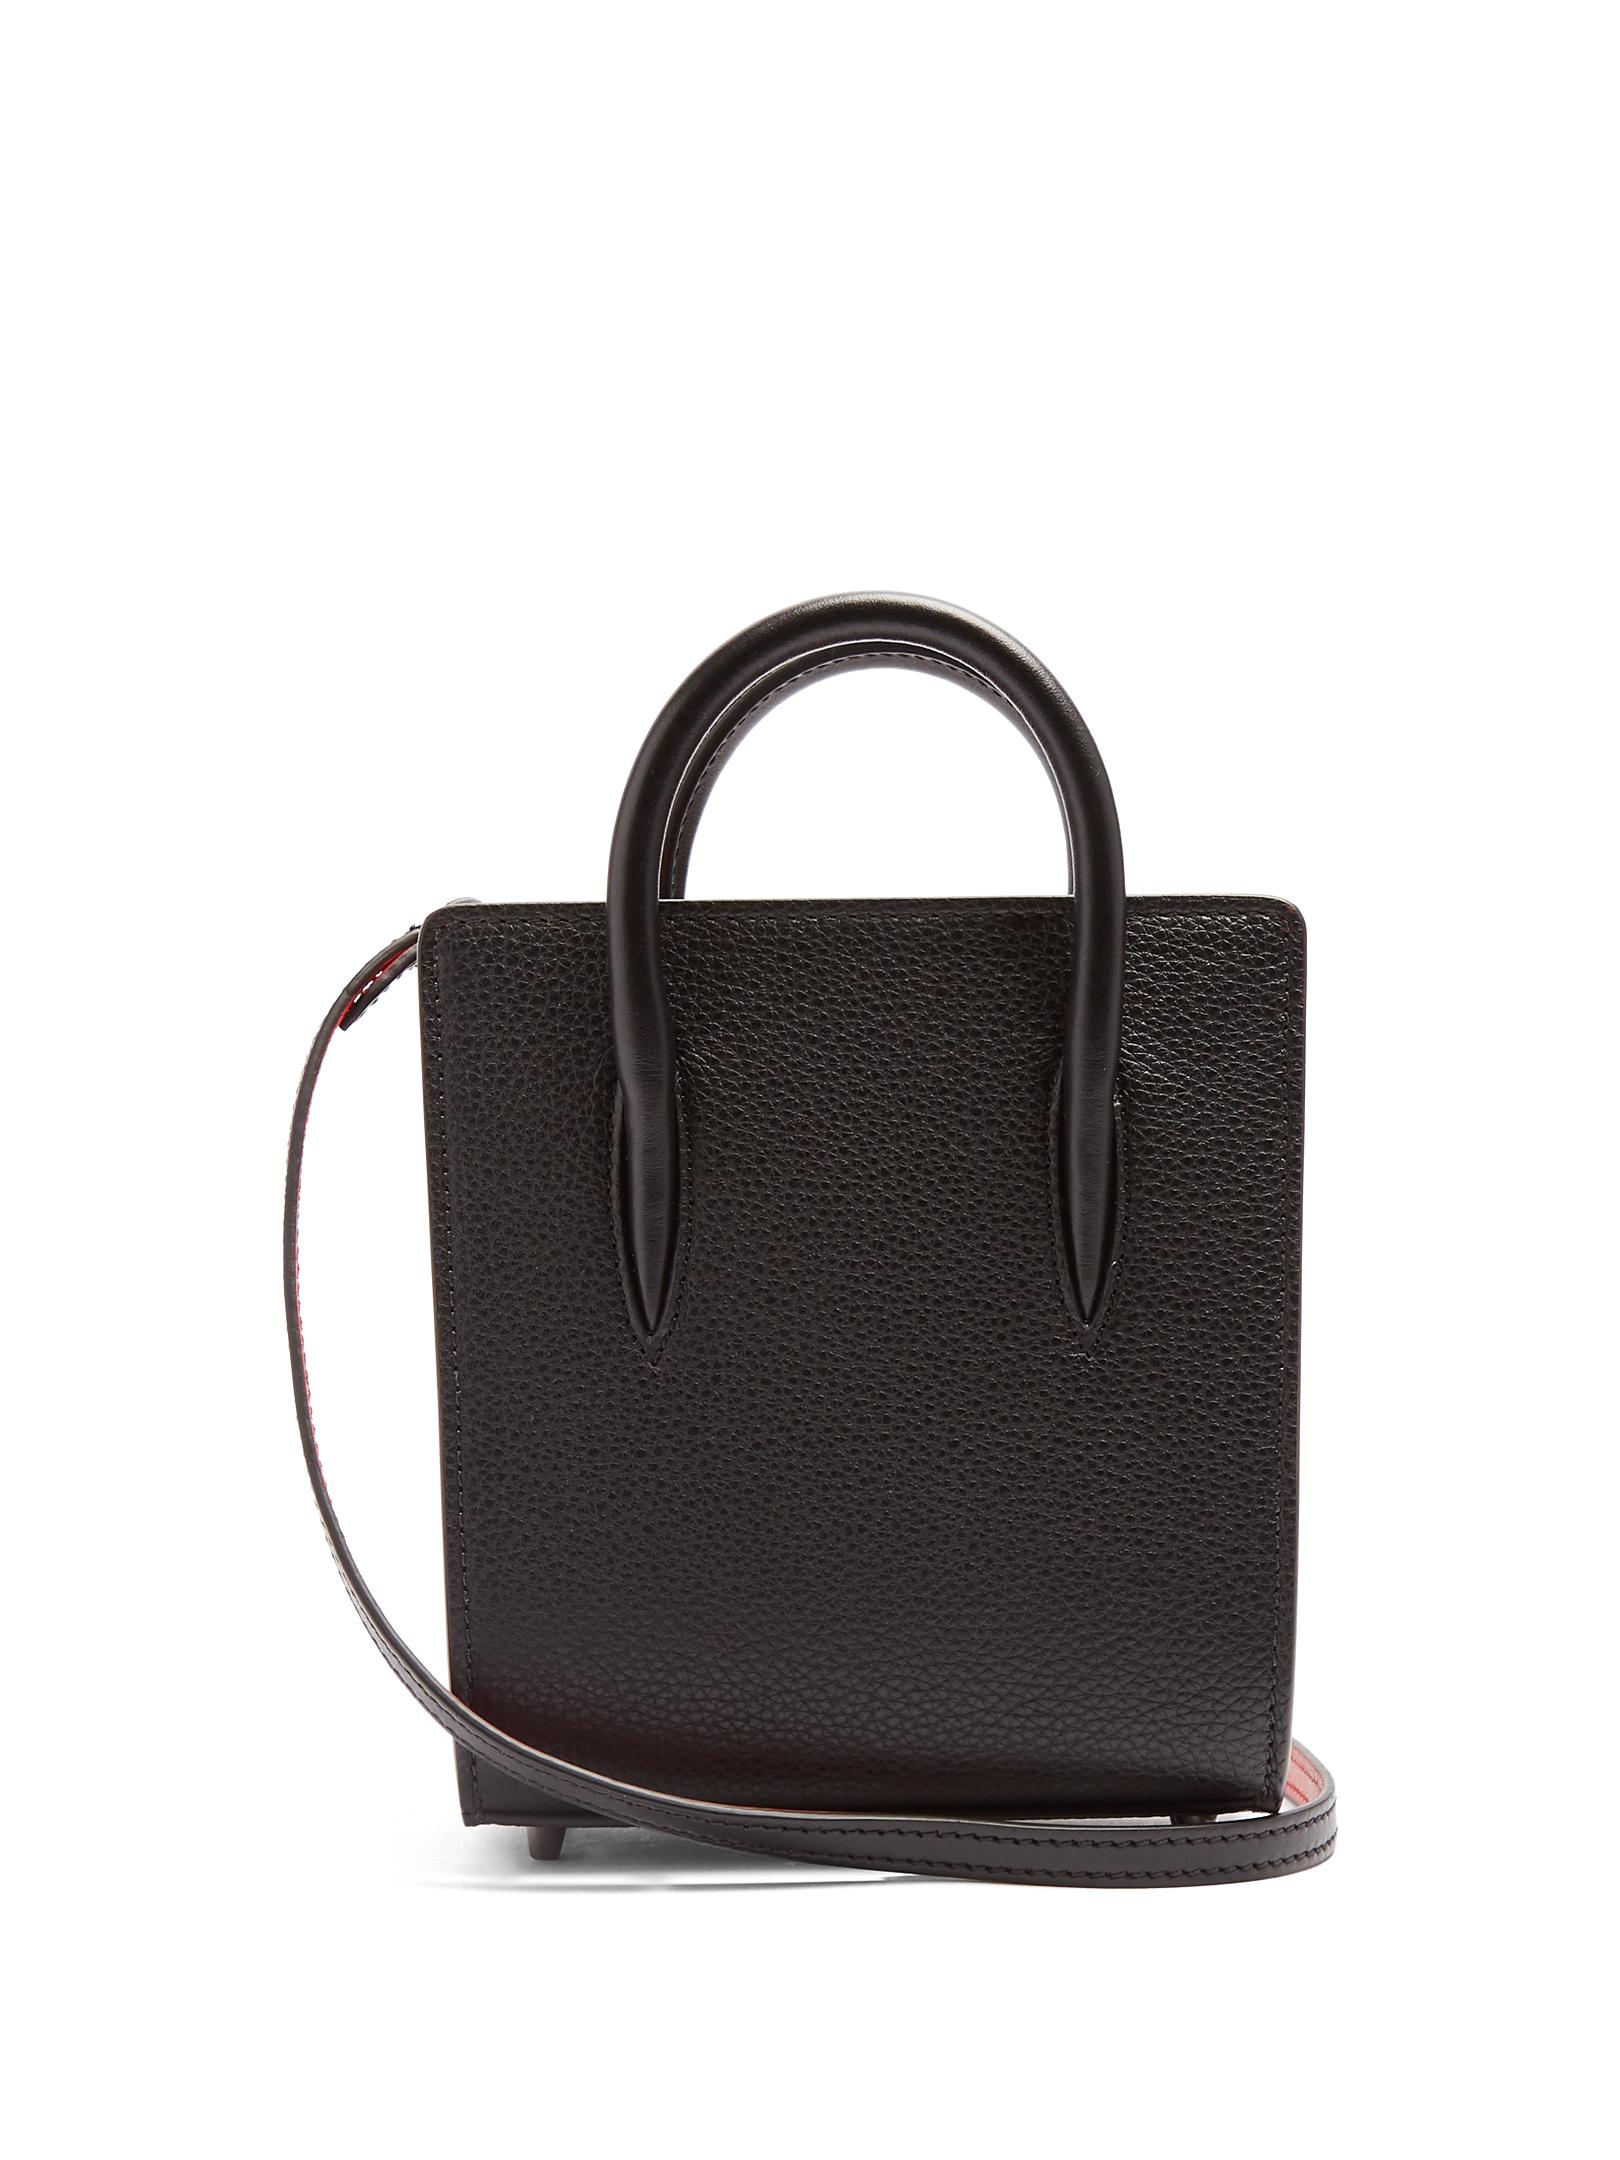 Christian Louboutin Paloma Nano Grained-leather Tote in Black - Lyst